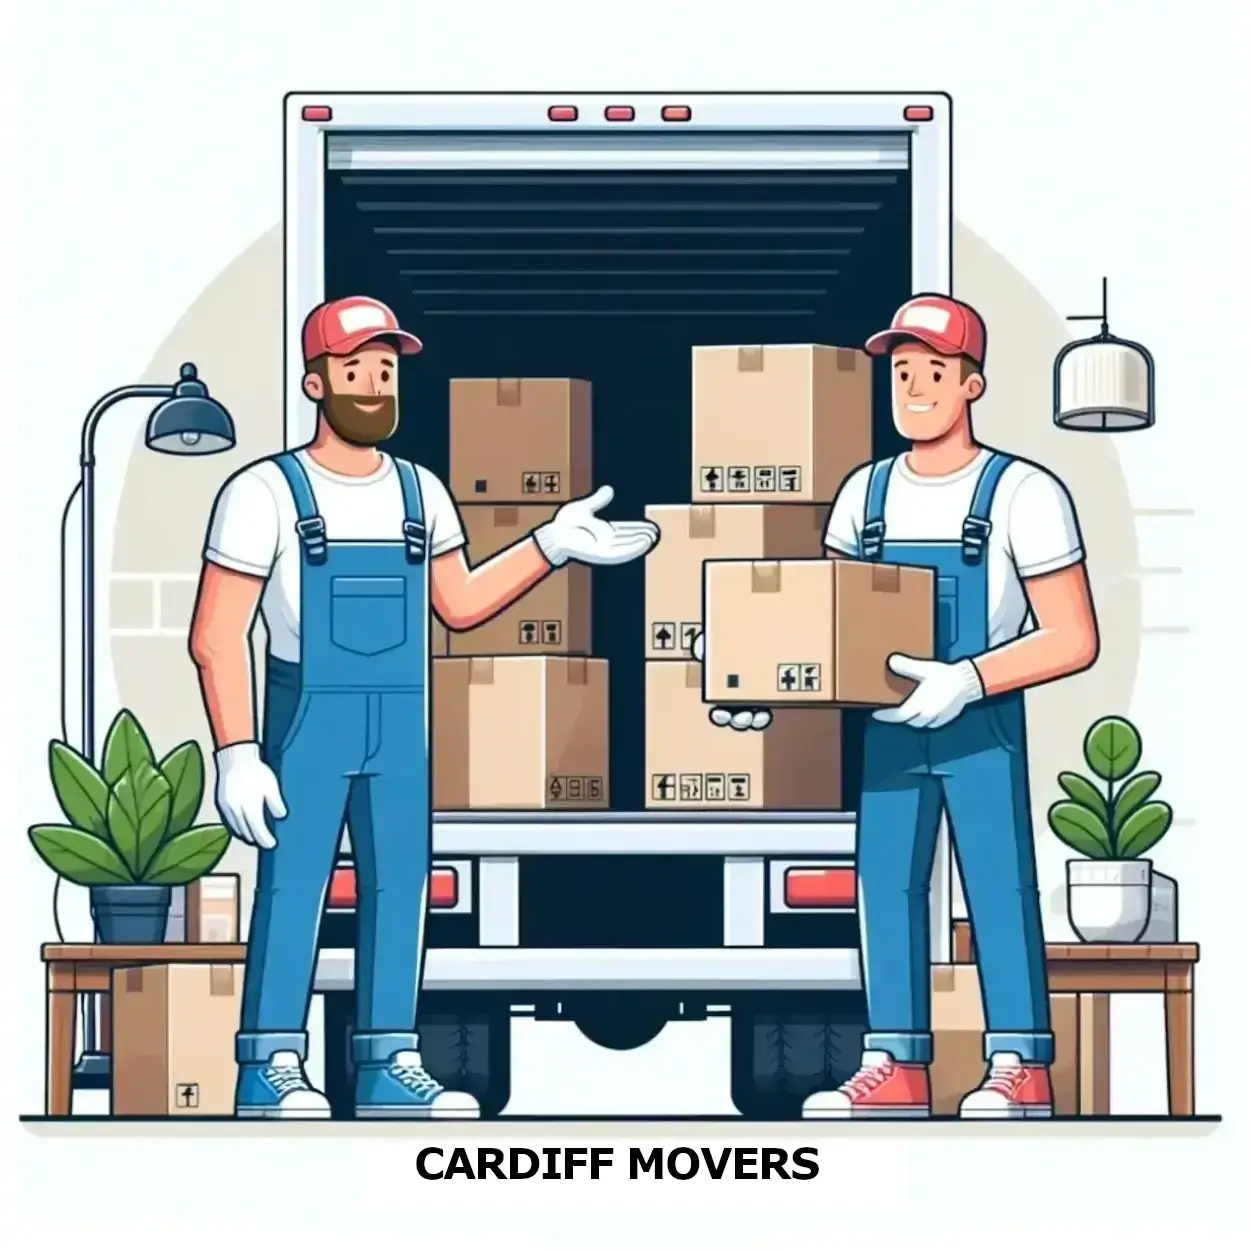 Cardiff Movers